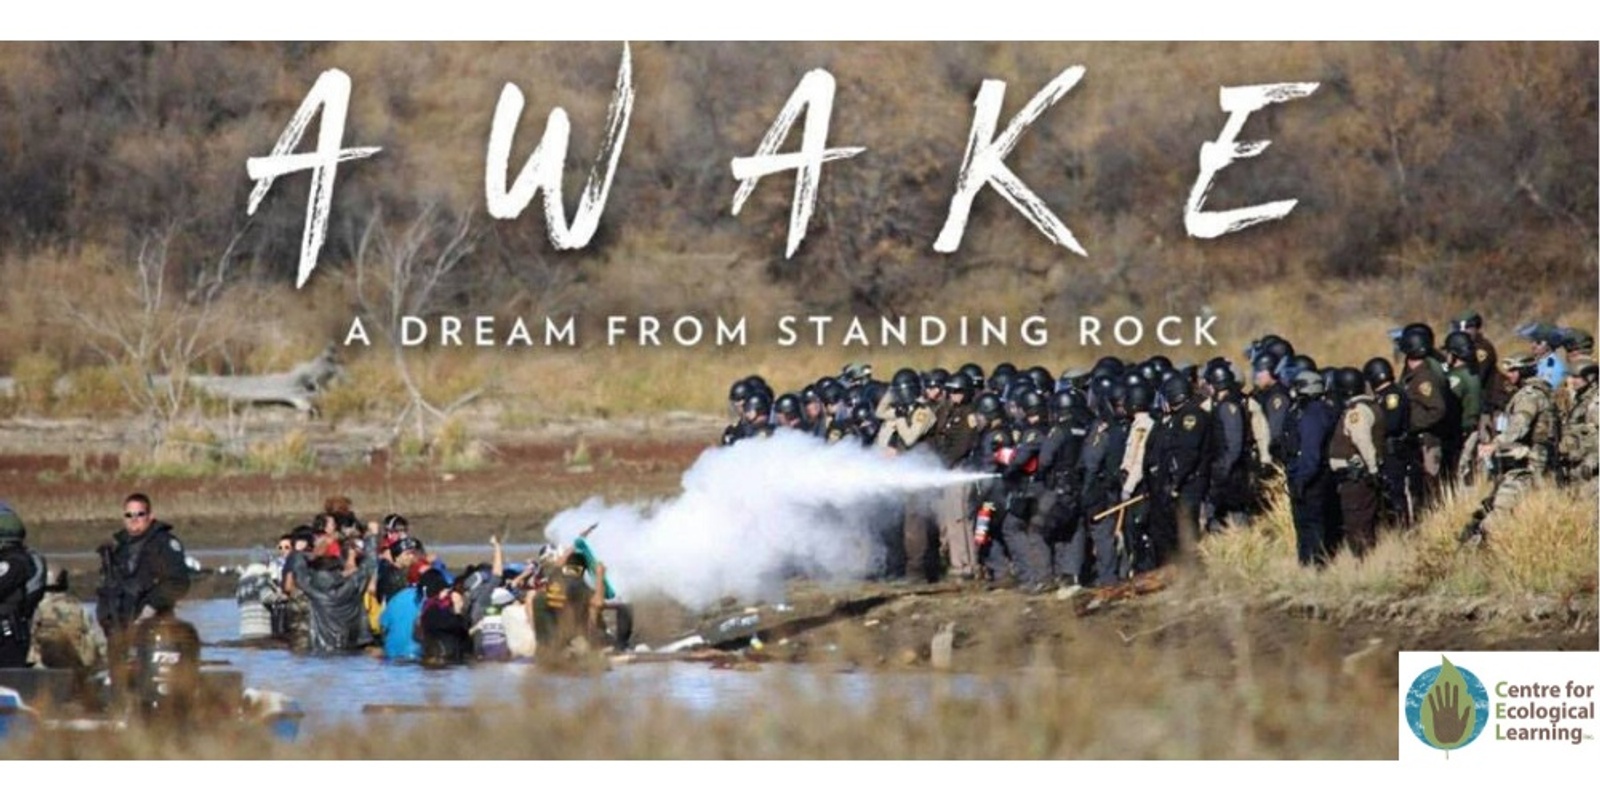 Banner image for Wauchope Community Arts Hall - Awake, A Dream from Standing Rock - Film screening and discussion